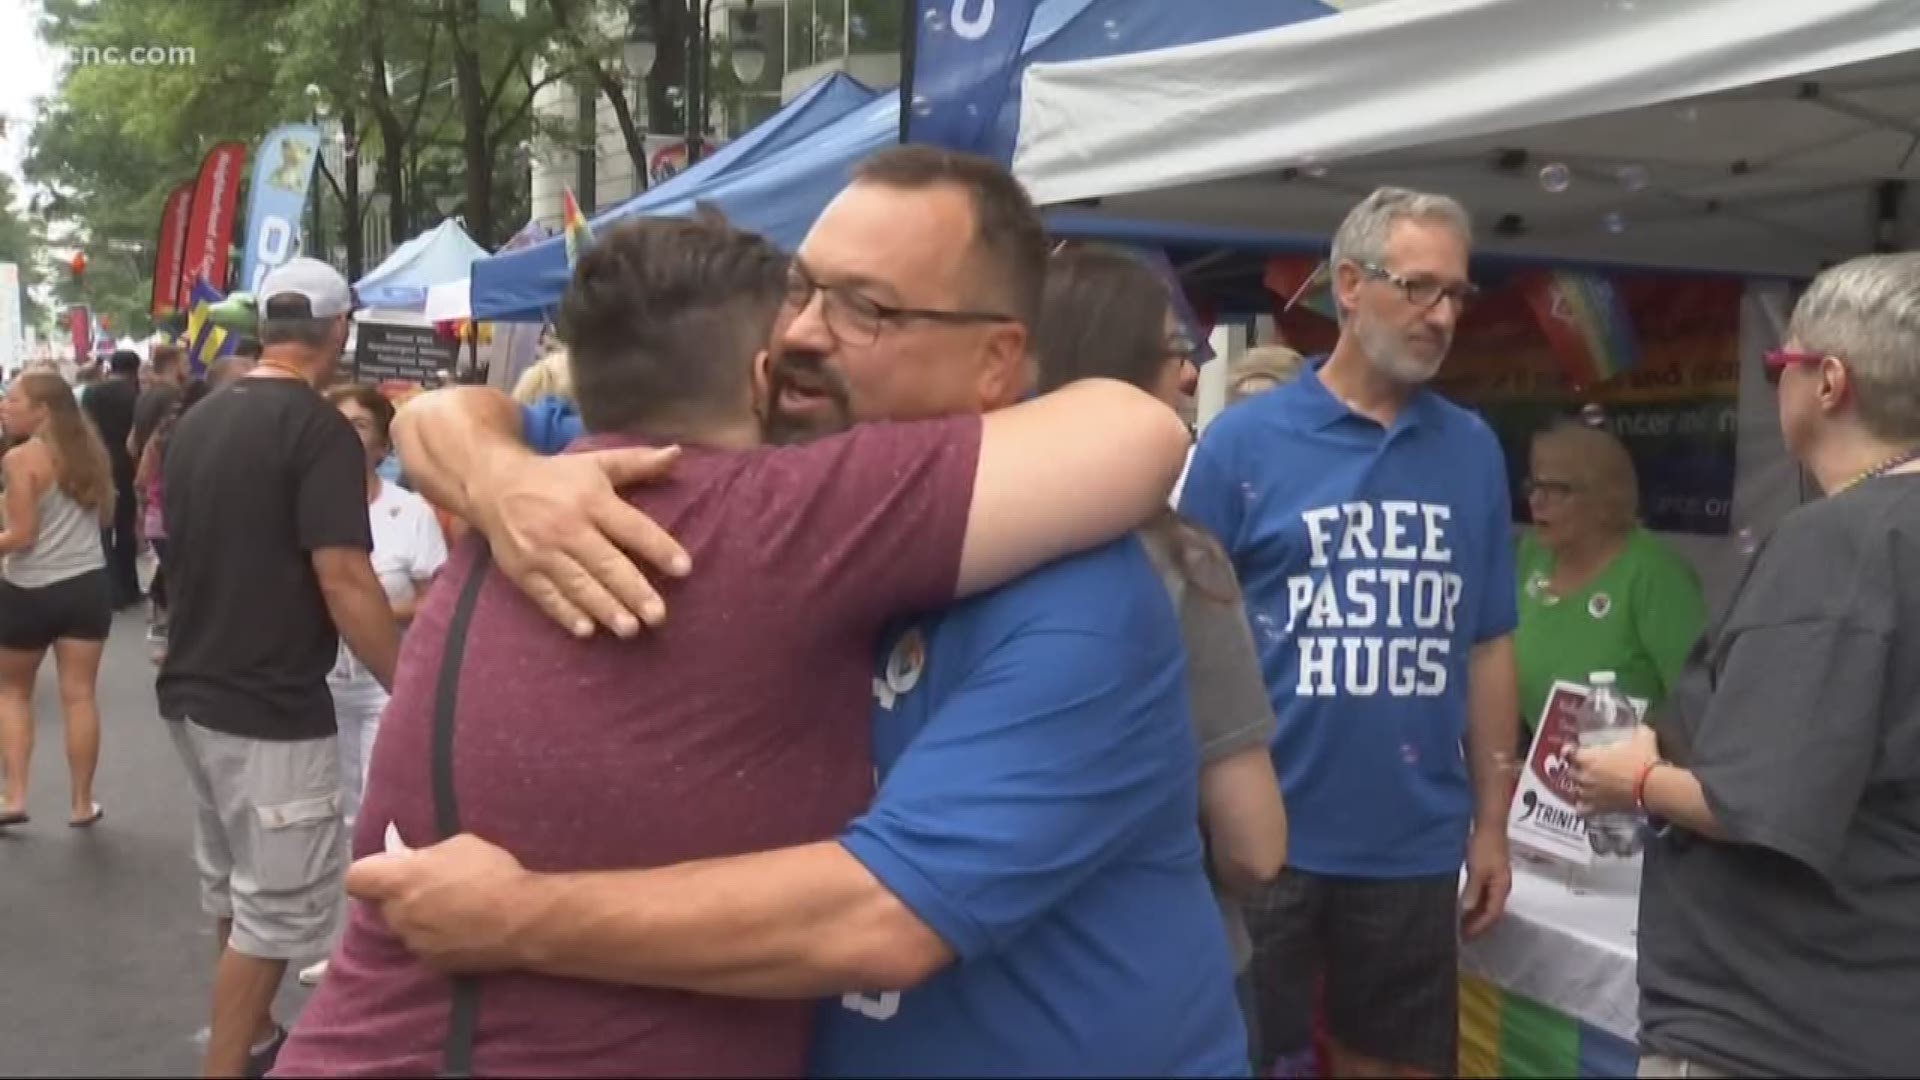 Thousands of people are in the Queen City this weekend for the annual Charlotte Pride Festival and Parade.